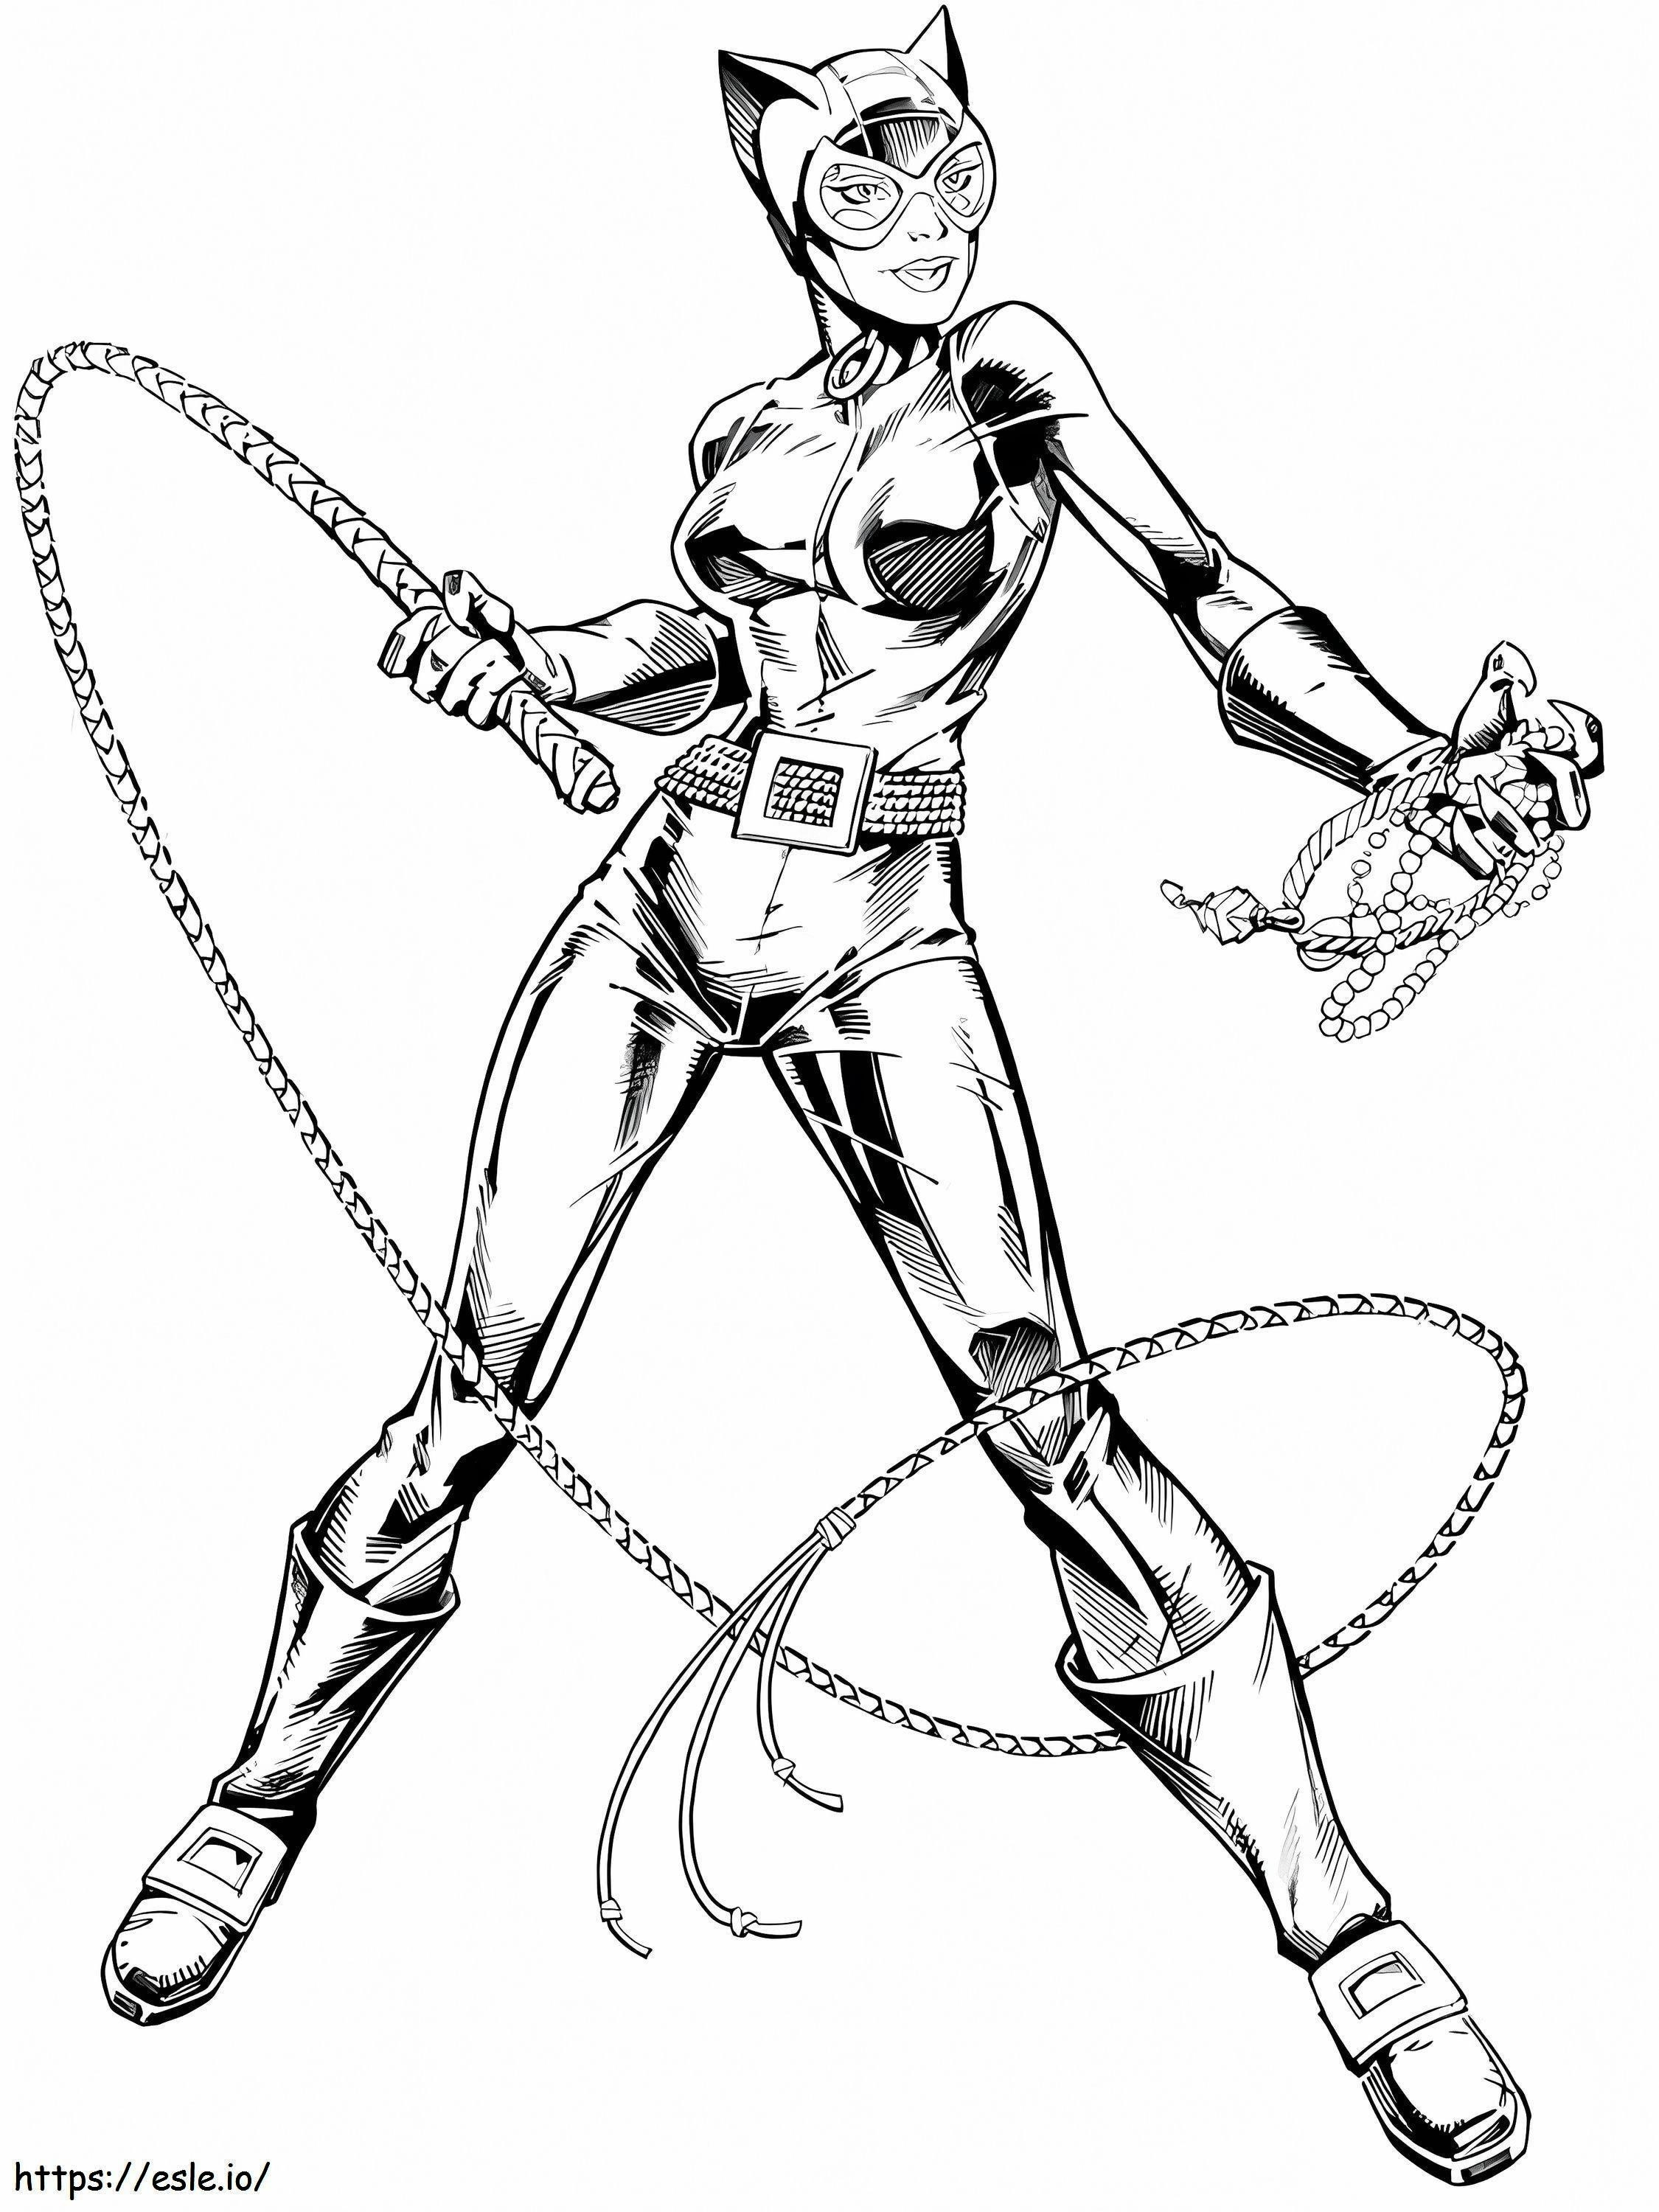 Cool Catwoman coloring page